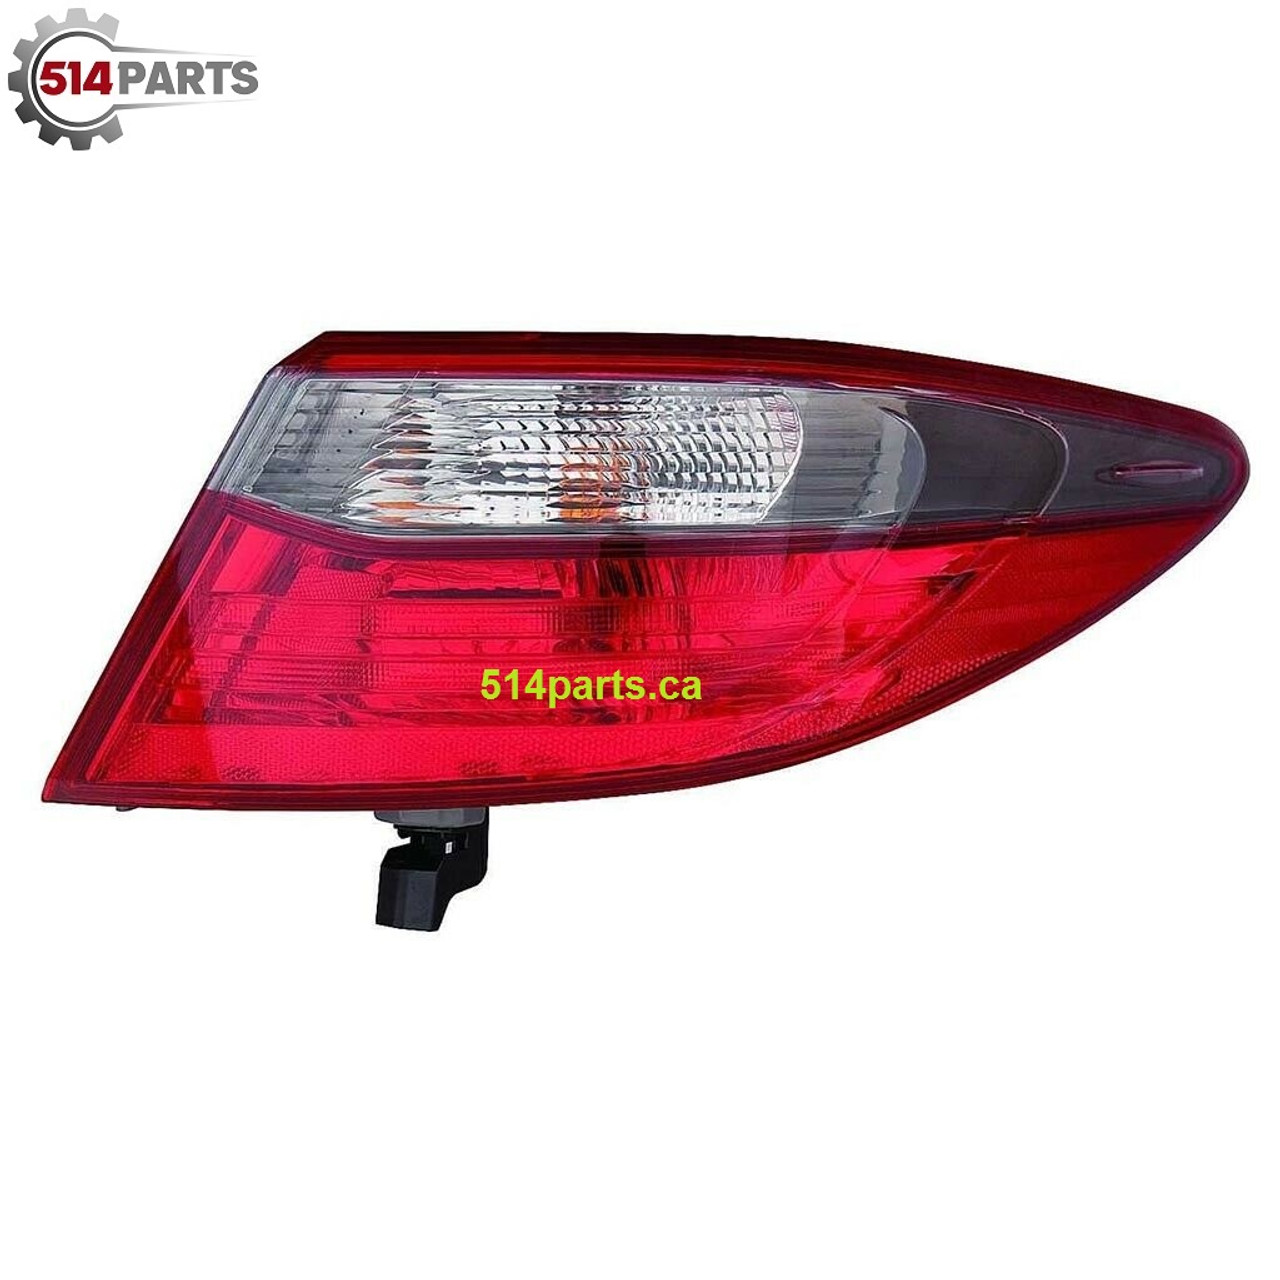 2015 - 2017 TOYOTA CAMRY and CAMRY HYBRID SPECIAL EDITION MODELS TAIL LIGHTS High Quality - PHARES ARRIERE Haute Qualite